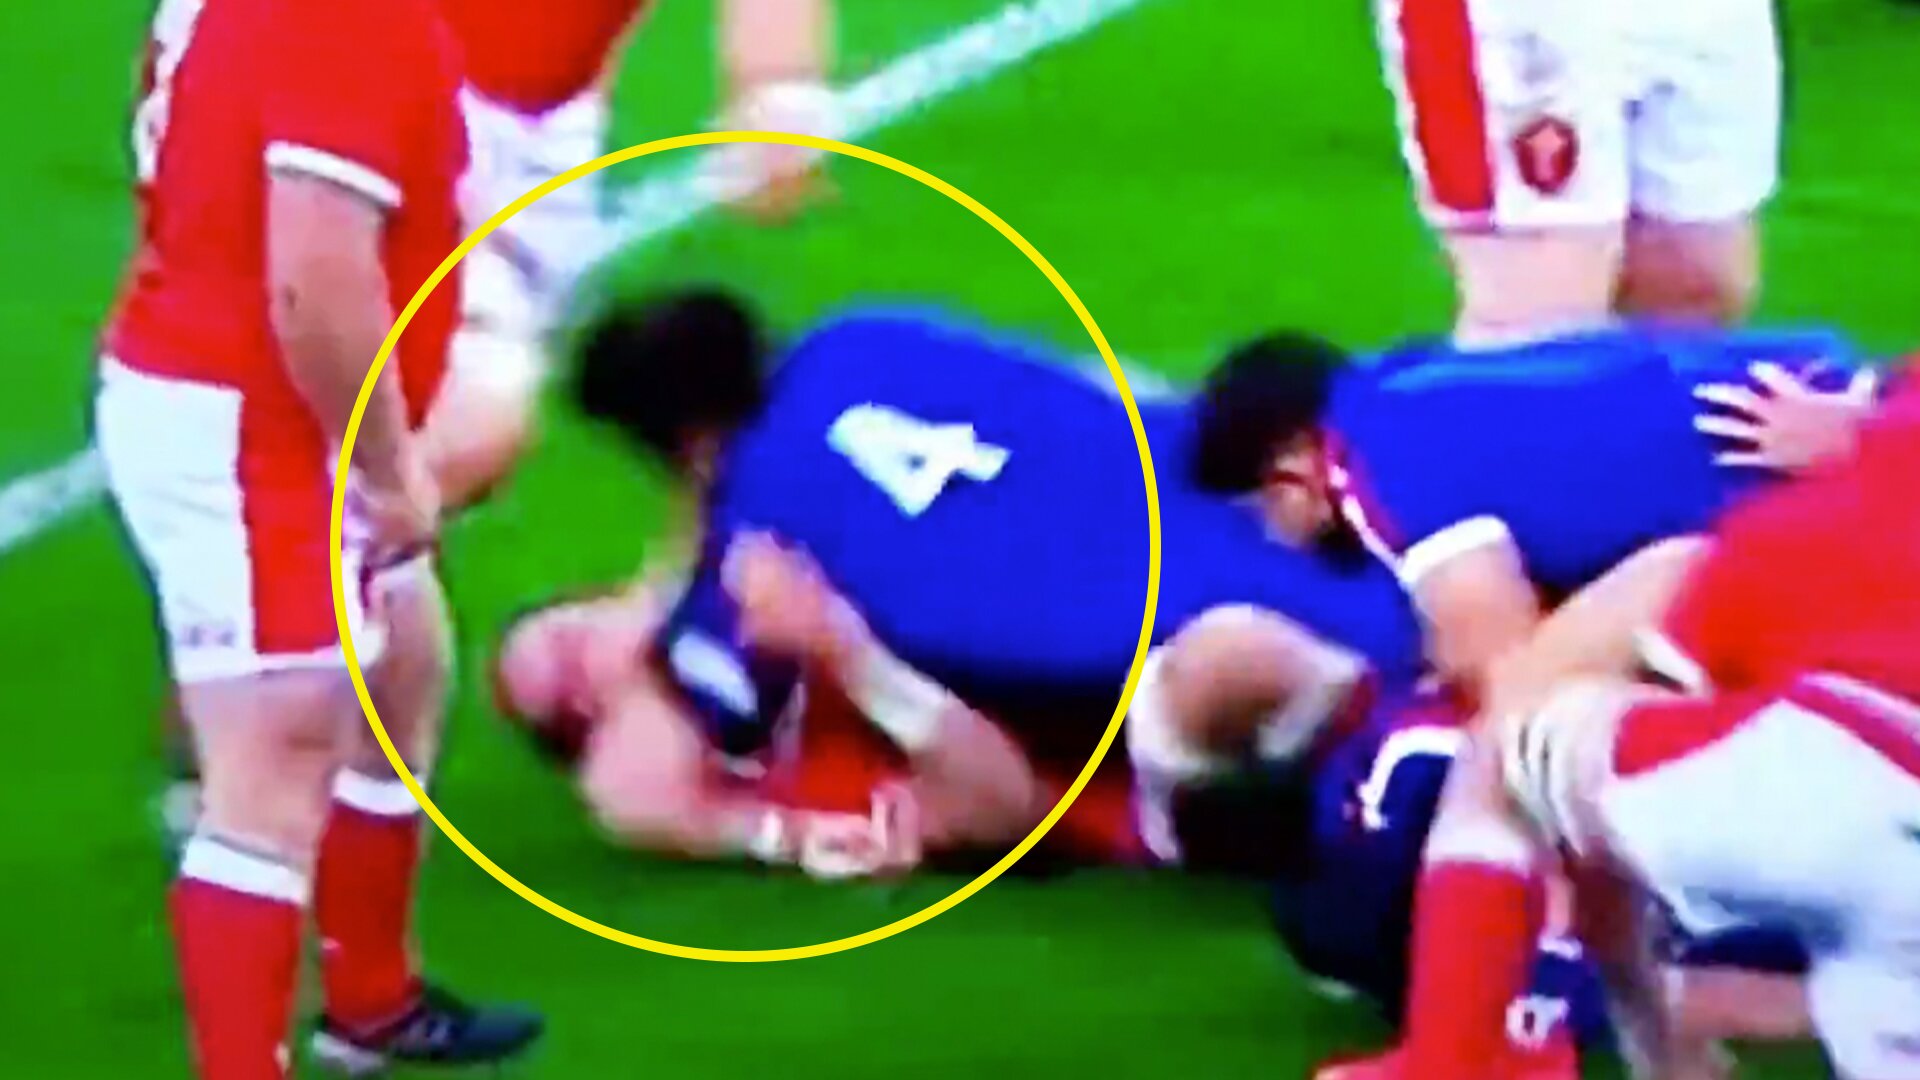 Welsh fans outraged after choke hold and elbow to the face of Alun Wyn Jones goes unpunished